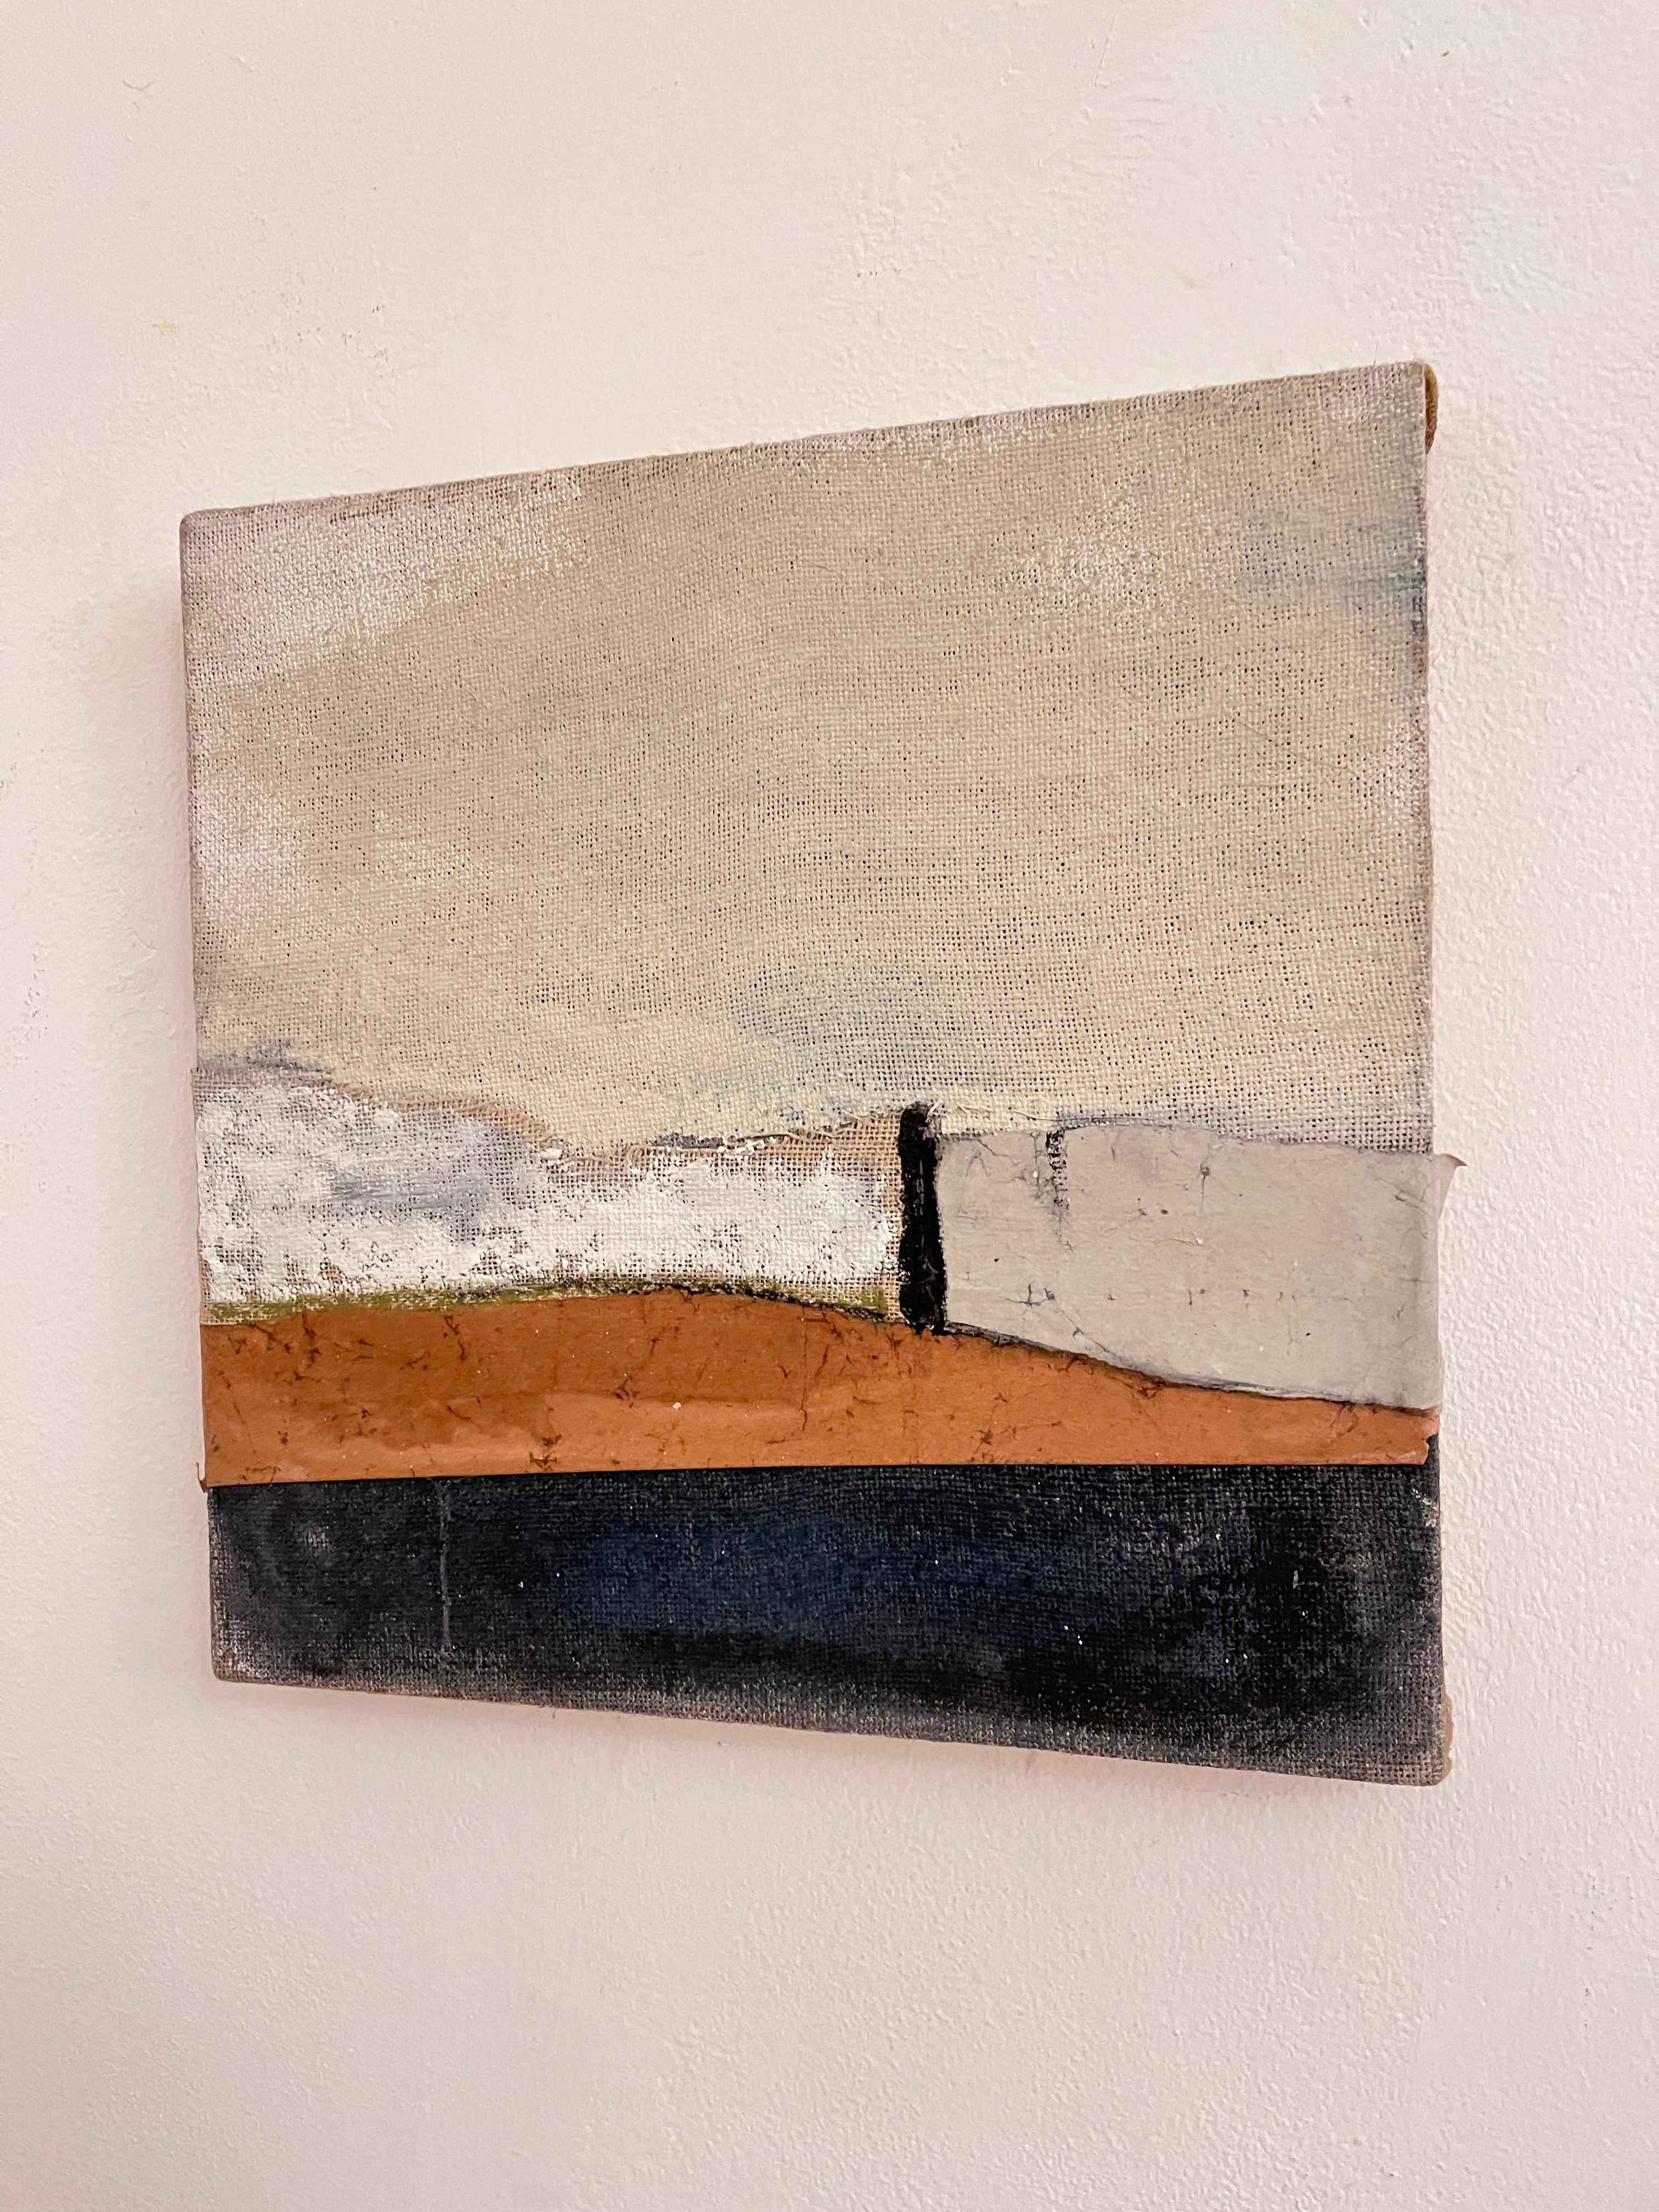 PaperLandscape
mixed media  and collage on juta canvas
50x50
2017

the painting is part of the Paper Landscape series
I like to call them fragile landscapes
the title PaperLandscape, but also wants to focus on the theme of landscape protection and